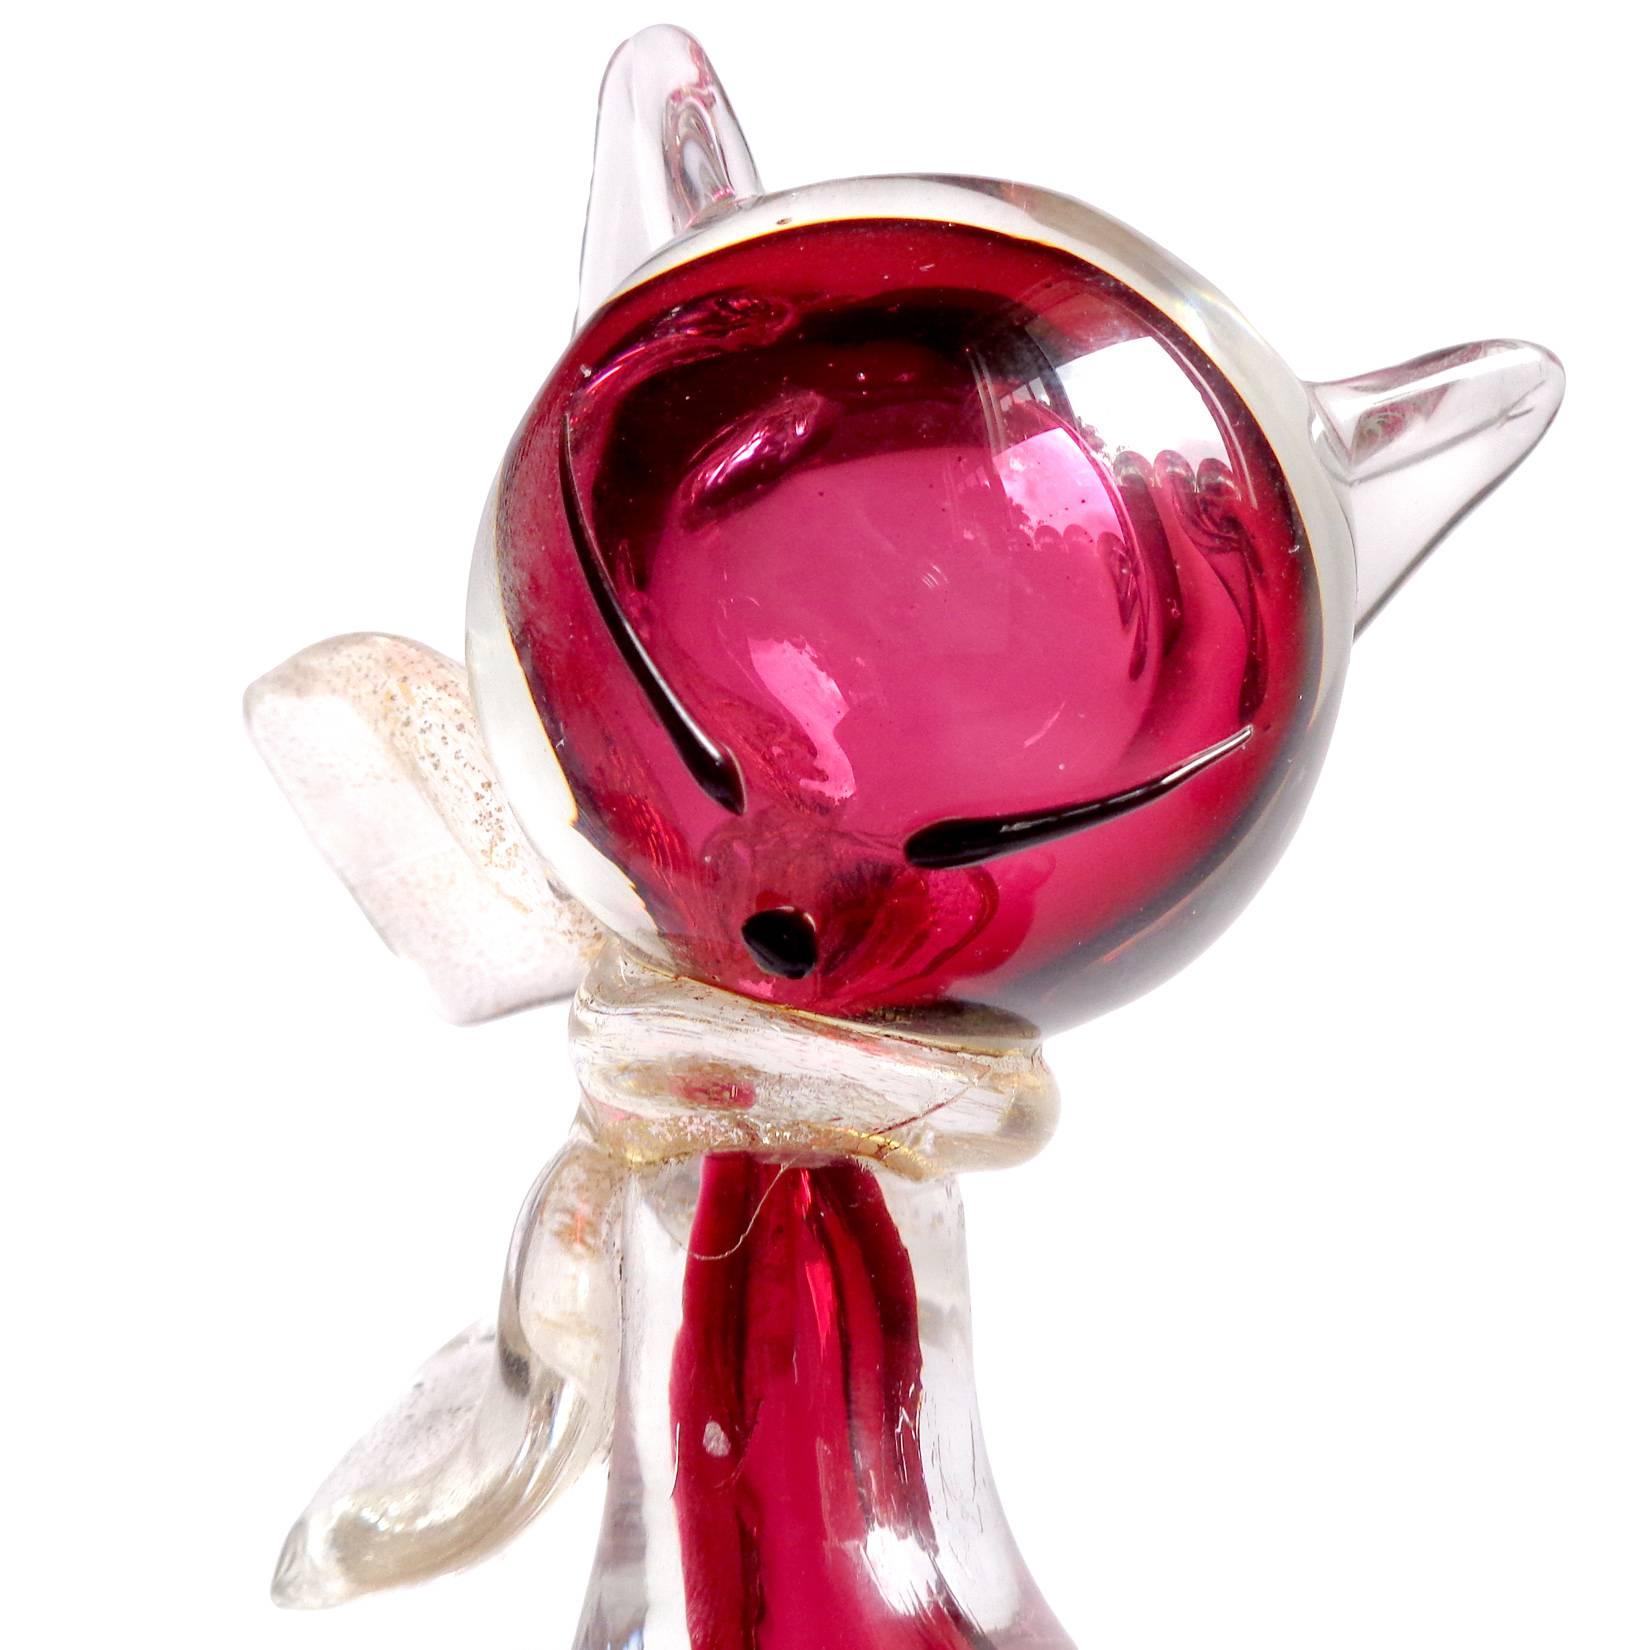 Super adorable Murano hand blown Sommerso cranberry pink and gold flecks Italian art glass kitty cat figurines. Documented to designer Alfredo Barbini, for Weil Ceramics and Glass. Both have gold leaf bows around their necks. The taller cat has been